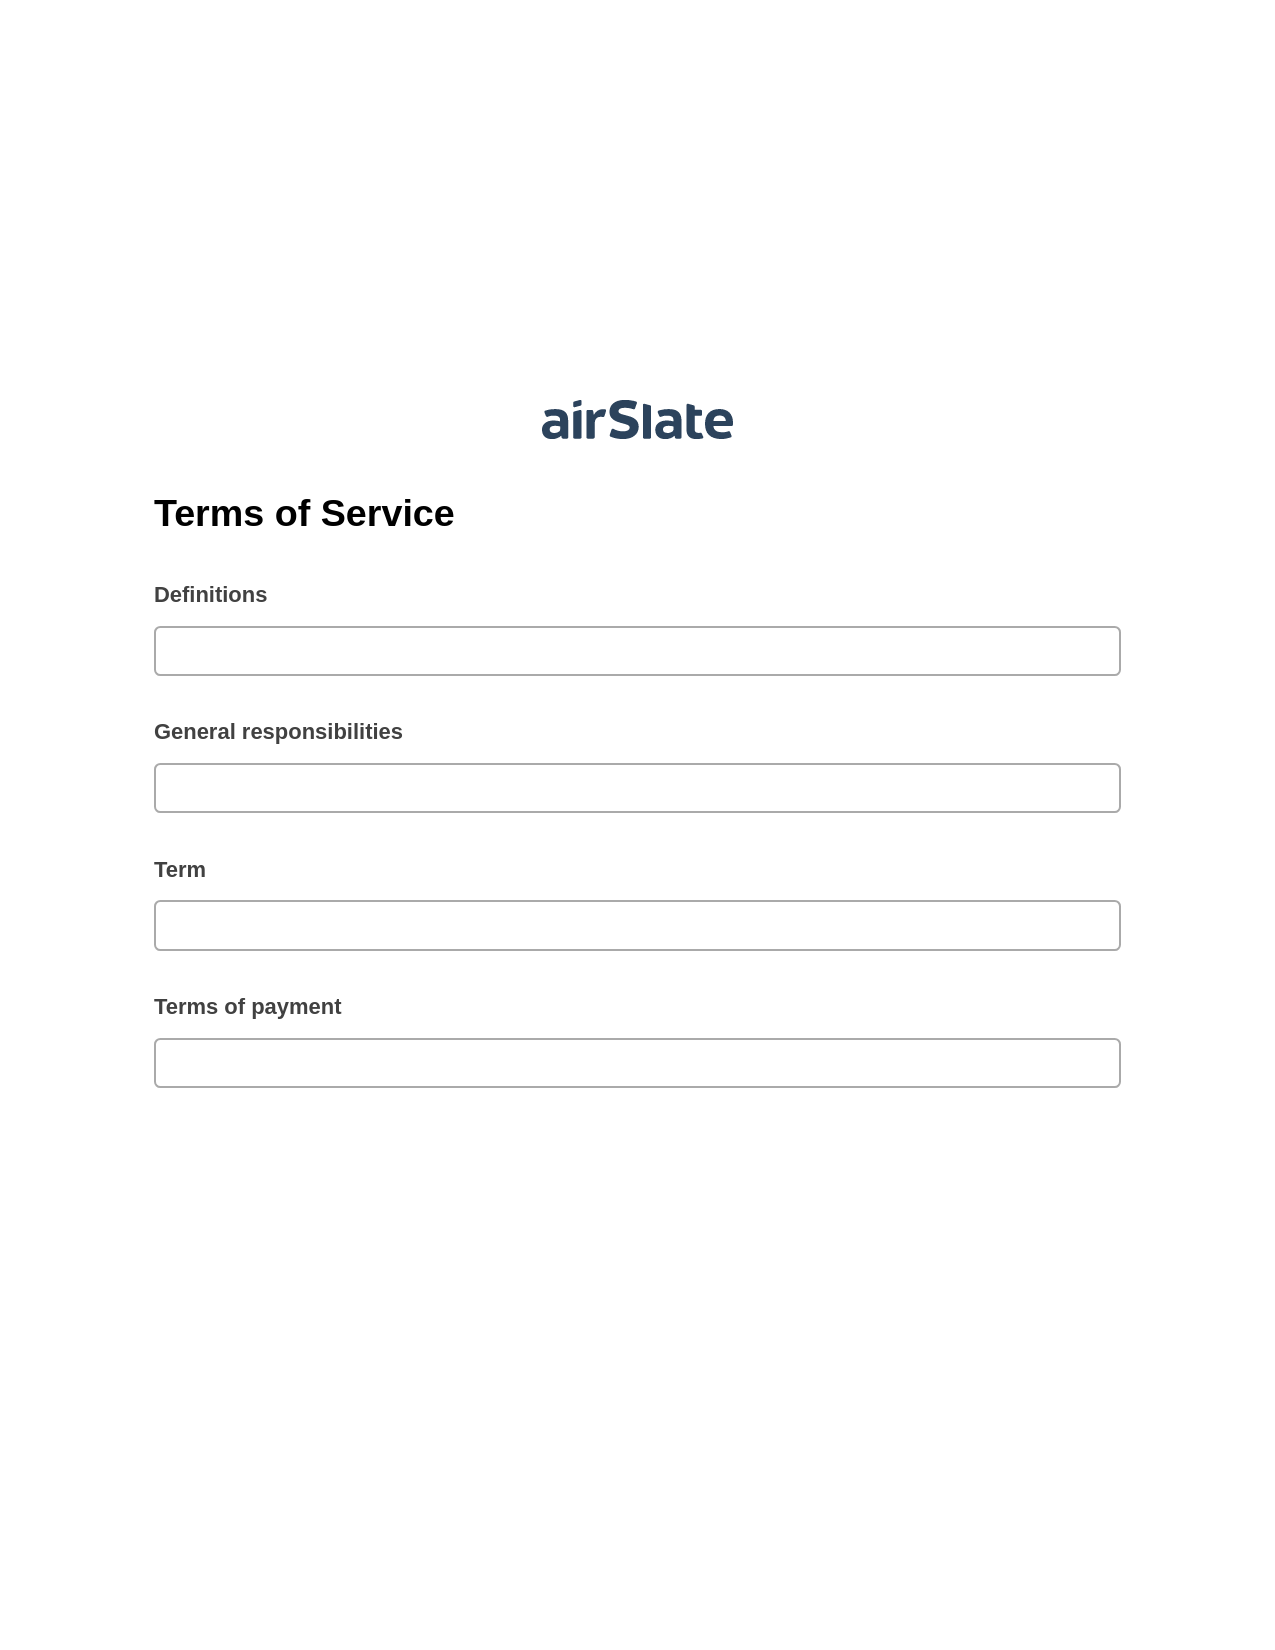 Terms of Service Pre-fill Slate from MS Dynamics 365 Records Bot, Create MS Dynamics 365 Records Bot, Box Bot